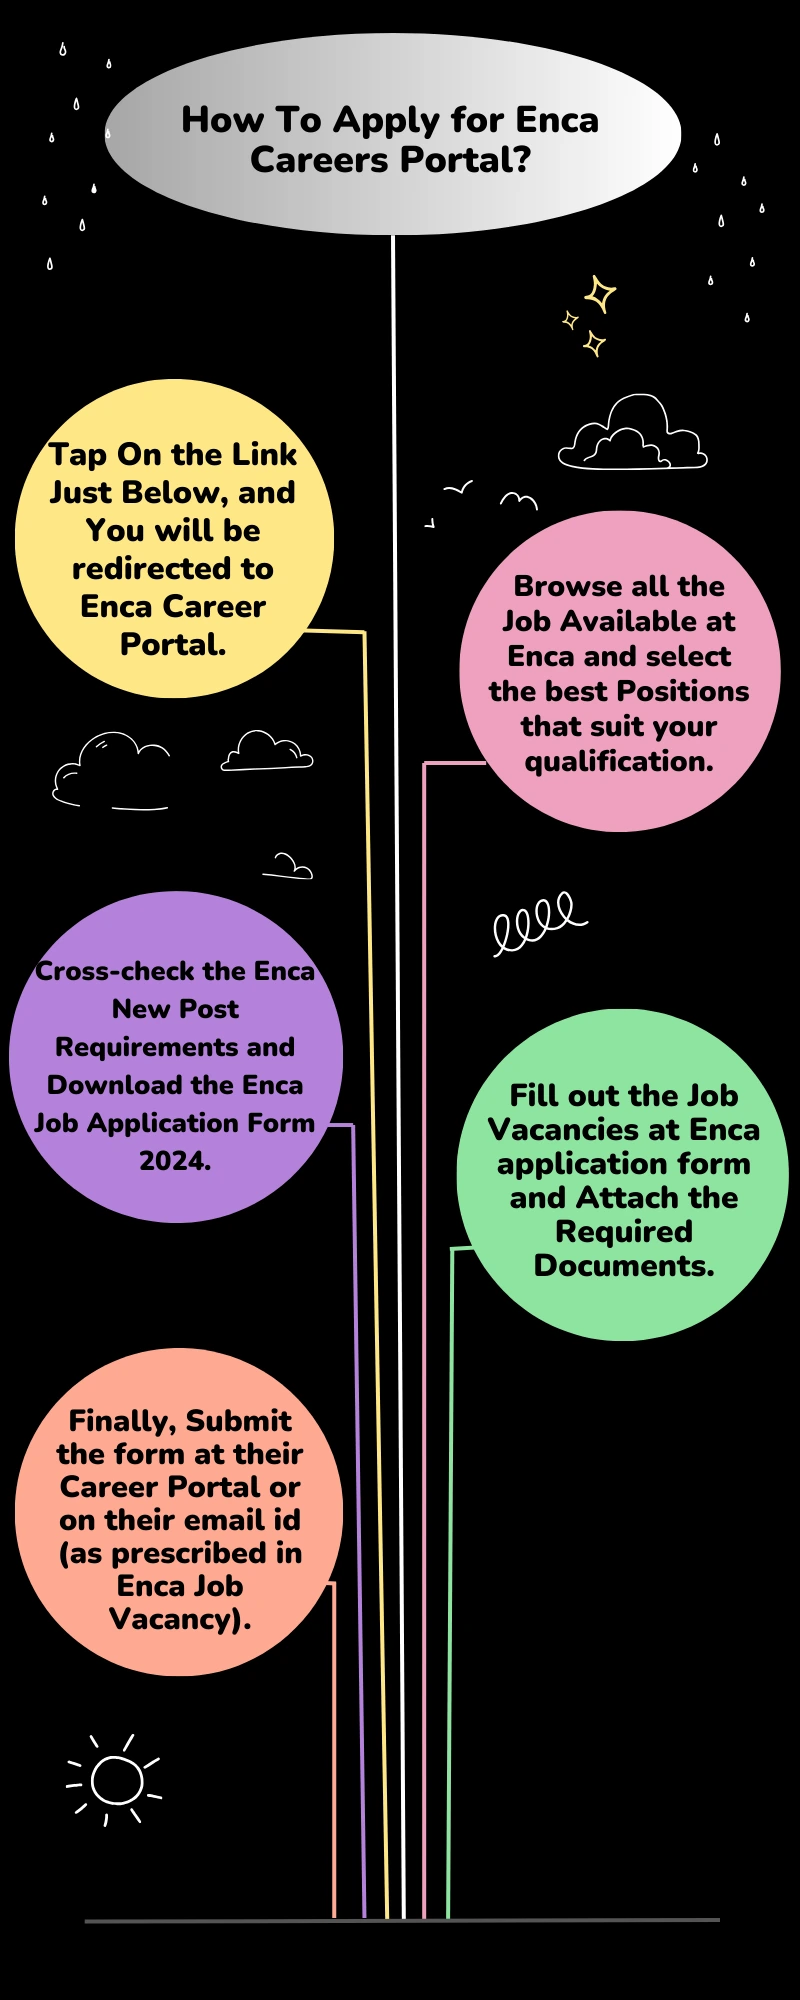 How To Apply for Enca Careers Portal?